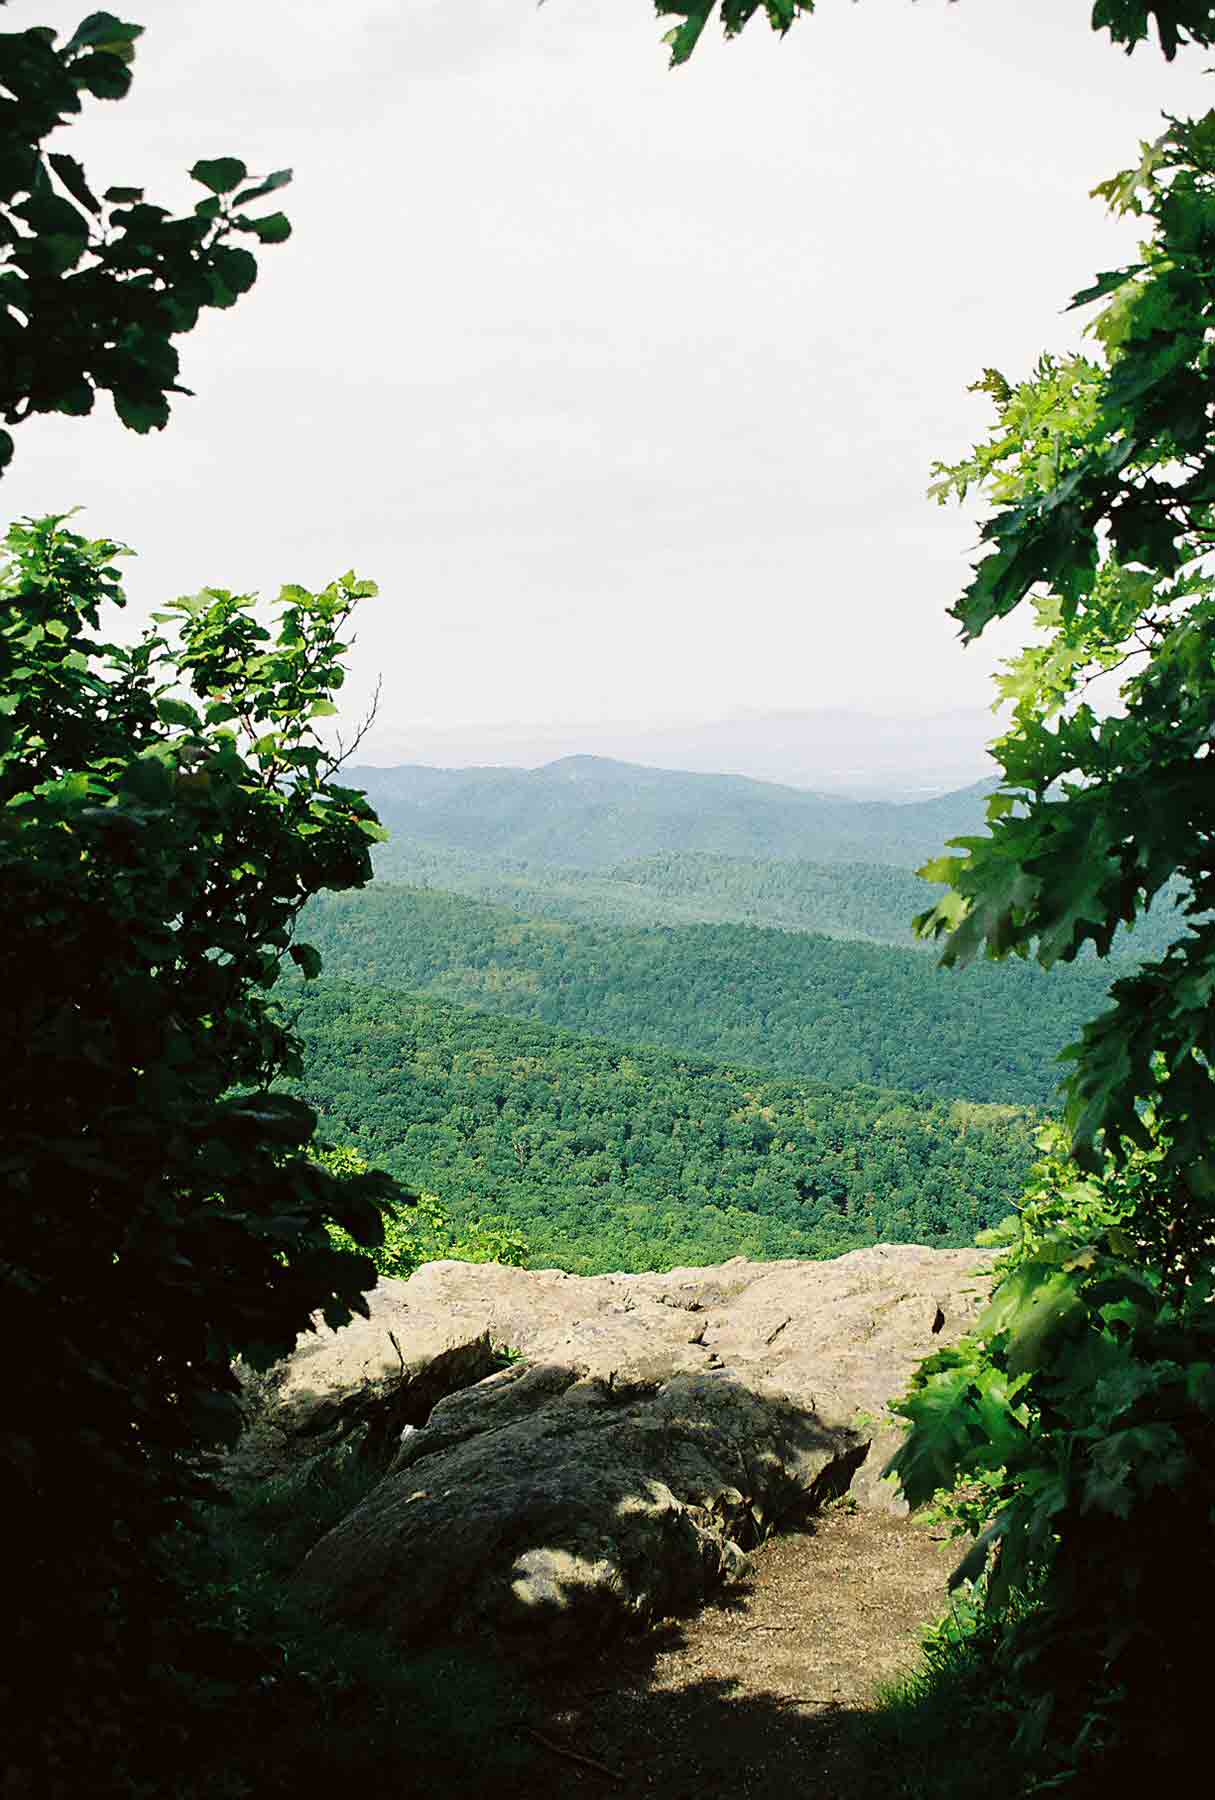 mm 2.8 - View from ledge near summit of Hightop (May 2004).  Courtesy dlcul@conncoll.edu